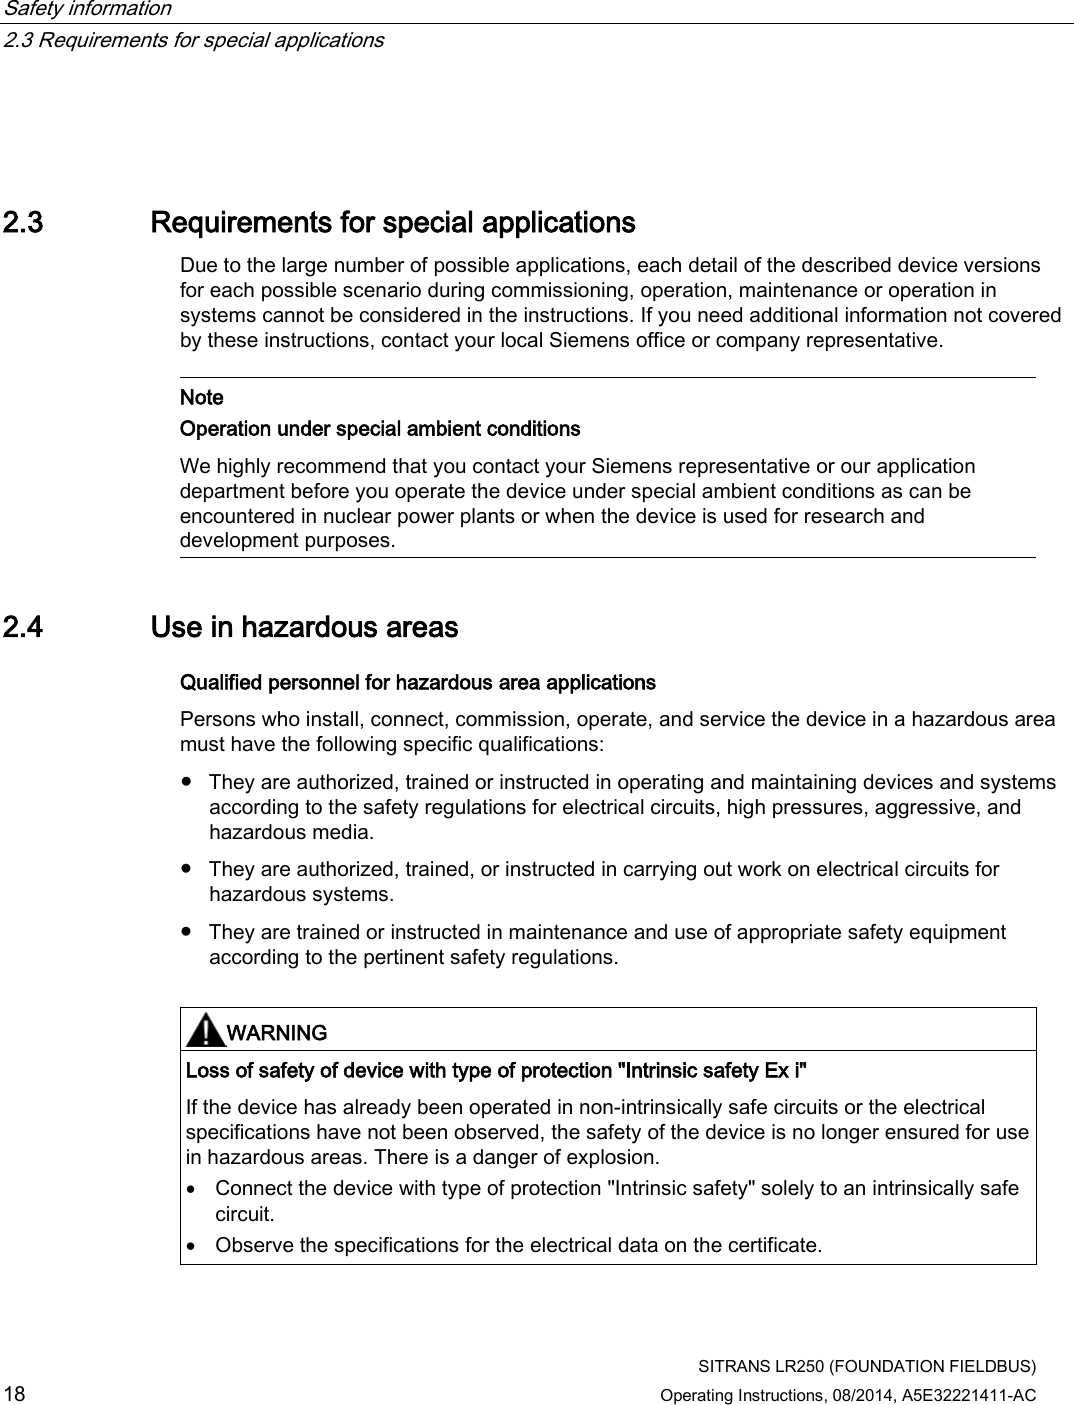 Safety information   2.3 Requirements for special applications  SITRANS LR250 (FOUNDATION FIELDBUS) 18 Operating Instructions, 08/2014, A5E32221411-AC  2.3 Requirements for special applications Due to the large number of possible applications, each detail of the described device versions for each possible scenario during commissioning, operation, maintenance or operation in systems cannot be considered in the instructions. If you need additional information not covered by these instructions, contact your local Siemens office or company representative.    Note Operation under special ambient conditions We highly recommend that you contact your Siemens representative or our application department before you operate the device under special ambient conditions as can be encountered in nuclear power plants or when the device is used for research and development purposes.  2.4 Use in hazardous areas Qualified personnel for hazardous area applications Persons who install, connect, commission, operate, and service the device in a hazardous area must have the following specific qualifications:  ● They are authorized, trained or instructed in operating and maintaining devices and systems according to the safety regulations for electrical circuits, high pressures, aggressive, and hazardous media. ● They are authorized, trained, or instructed in carrying out work on electrical circuits for hazardous systems. ● They are trained or instructed in maintenance and use of appropriate safety equipment according to the pertinent safety regulations.   WARNING Loss of safety of device with type of protection &quot;Intrinsic safety Ex i&quot; If the device has already been operated in non-intrinsically safe circuits or the electrical specifications have not been observed, the safety of the device is no longer ensured for use in hazardous areas. There is a danger of explosion. • Connect the device with type of protection &quot;Intrinsic safety&quot; solely to an intrinsically safe circuit. • Observe the specifications for the electrical data on the certificate.  